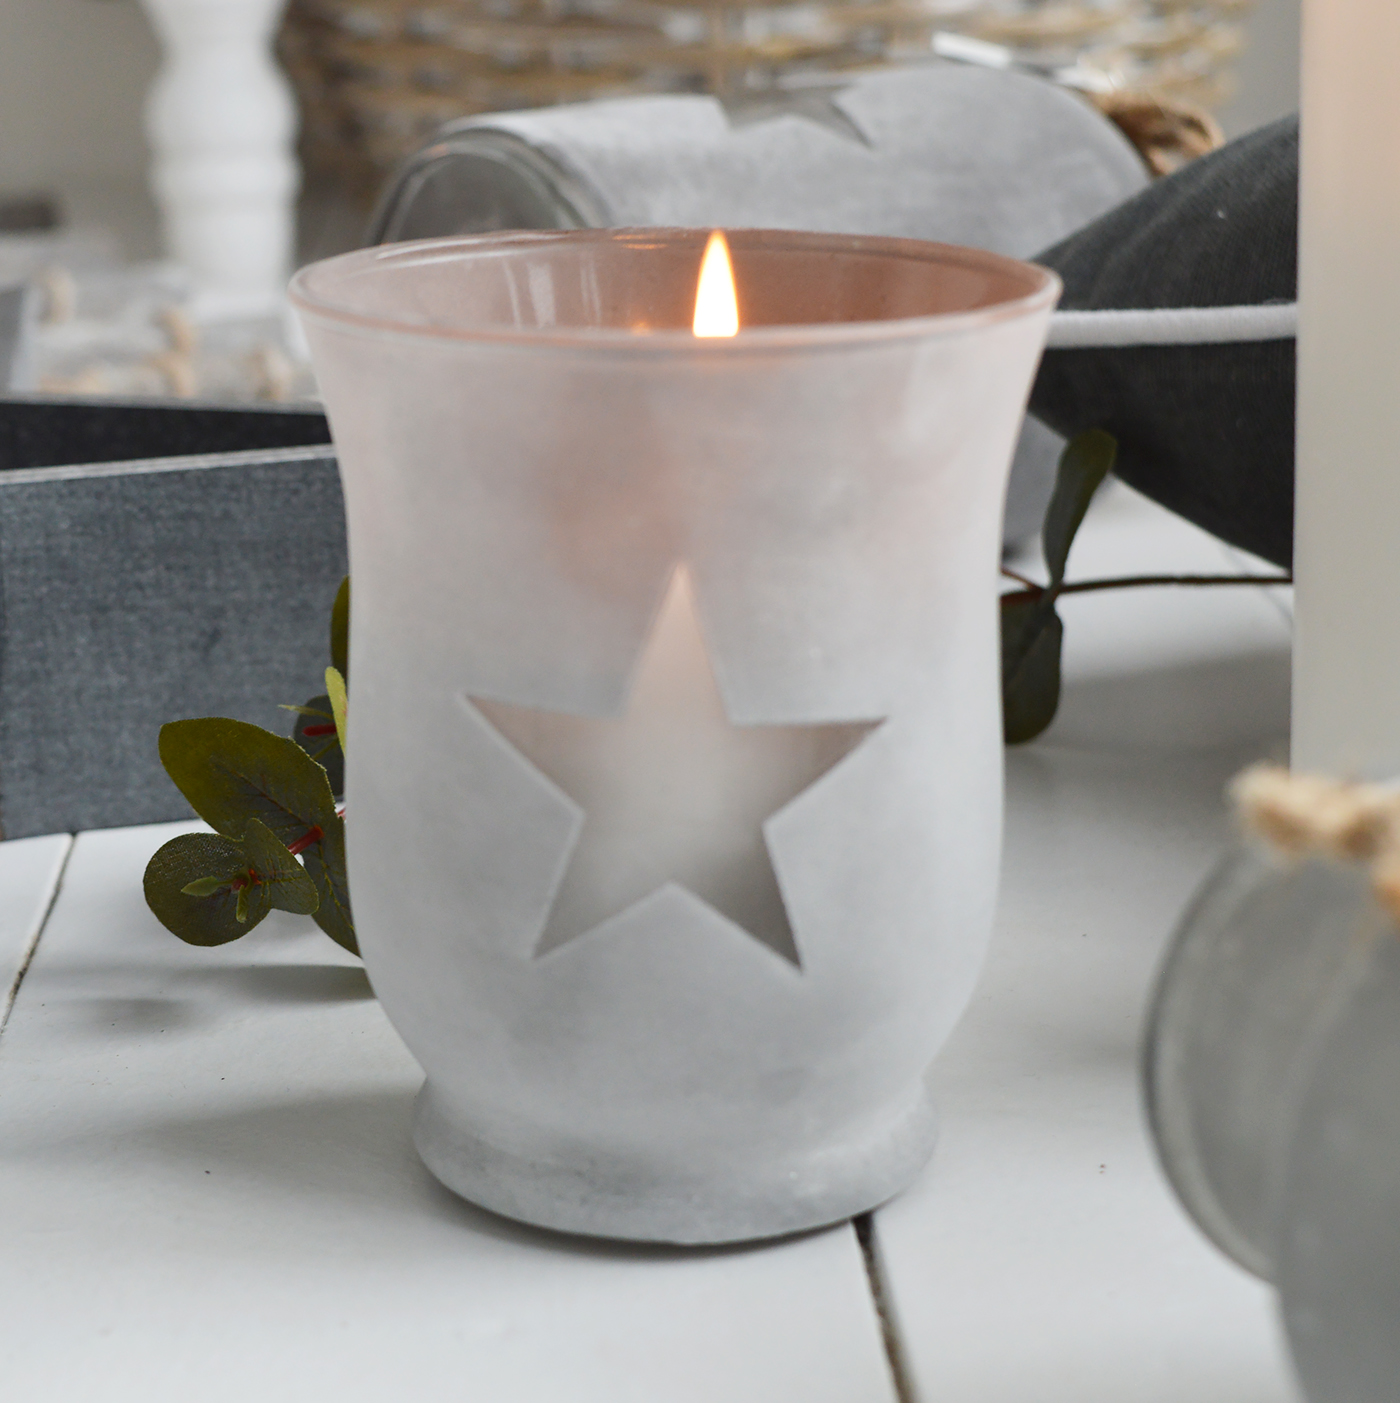 Etched glass  lantern candle holder with stars from The White Lighthouse. New England , coastal, country and white furniture and home interiors for the hallway, living room, bedroom and bathroom